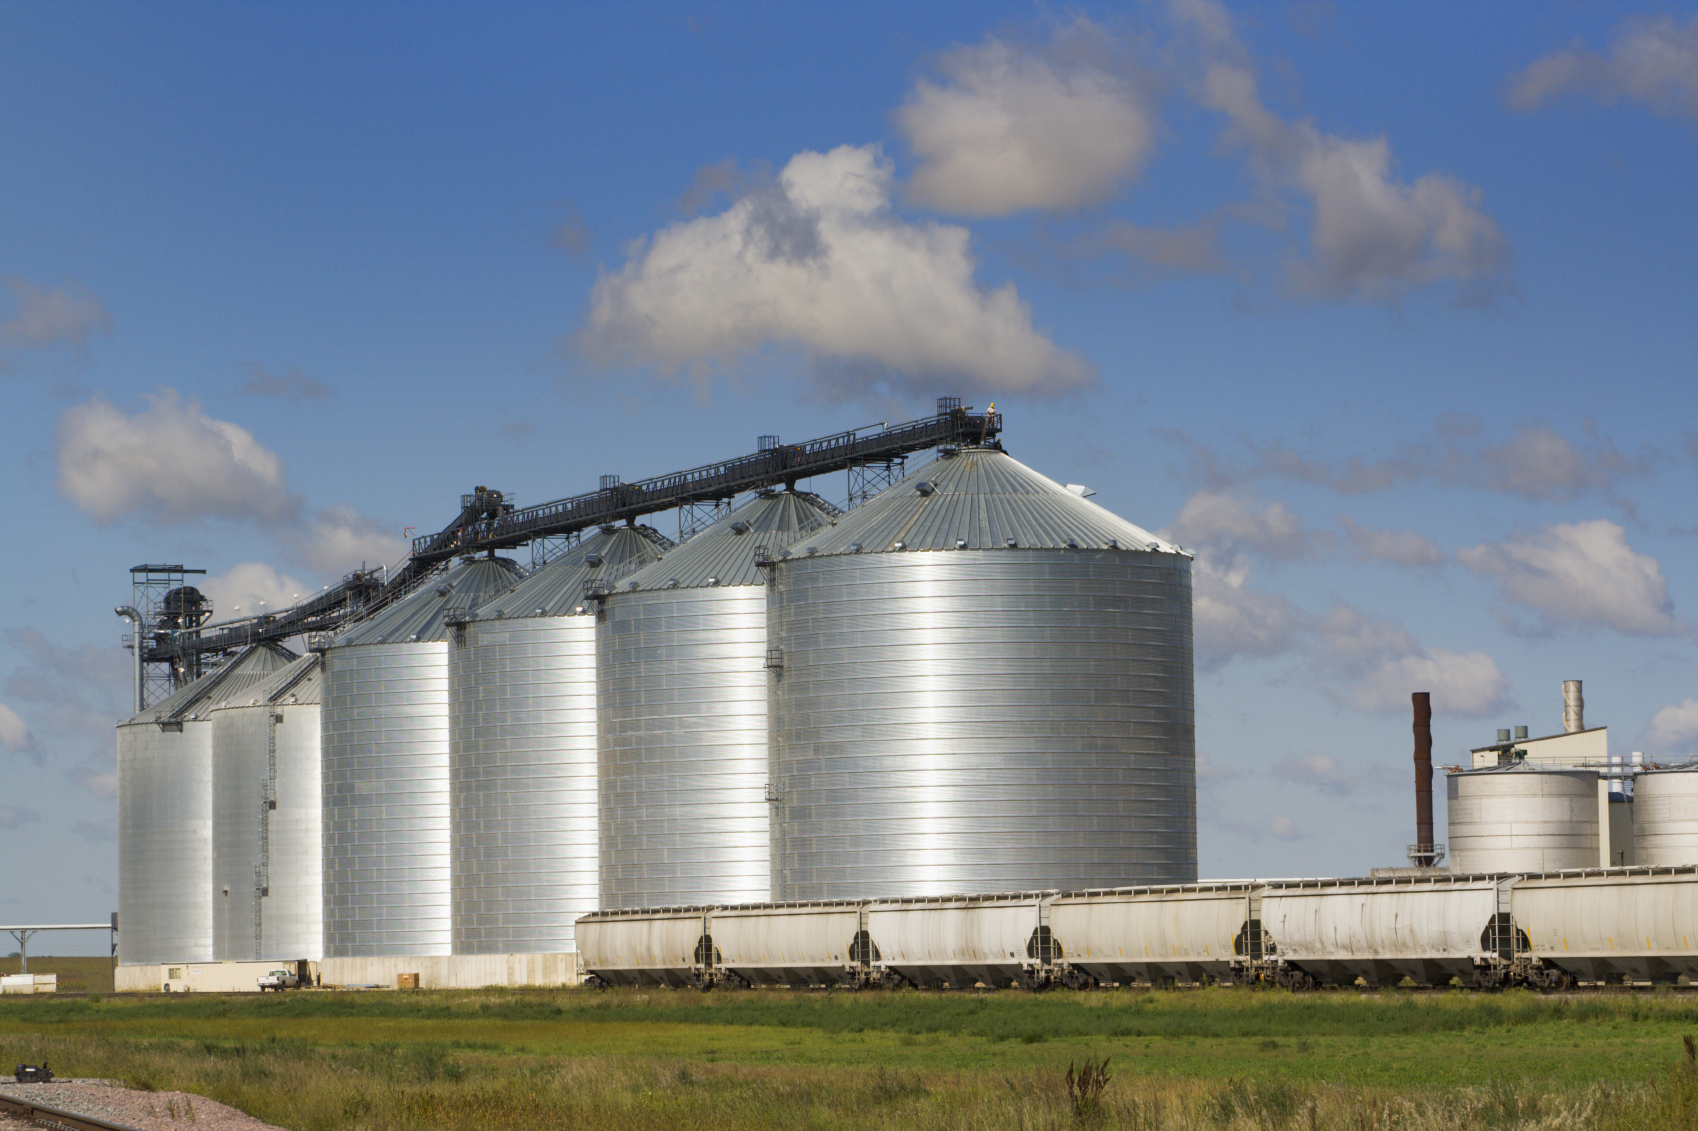 Image of an inland terminal grain elevator and rail cars to illustrate freight rail service